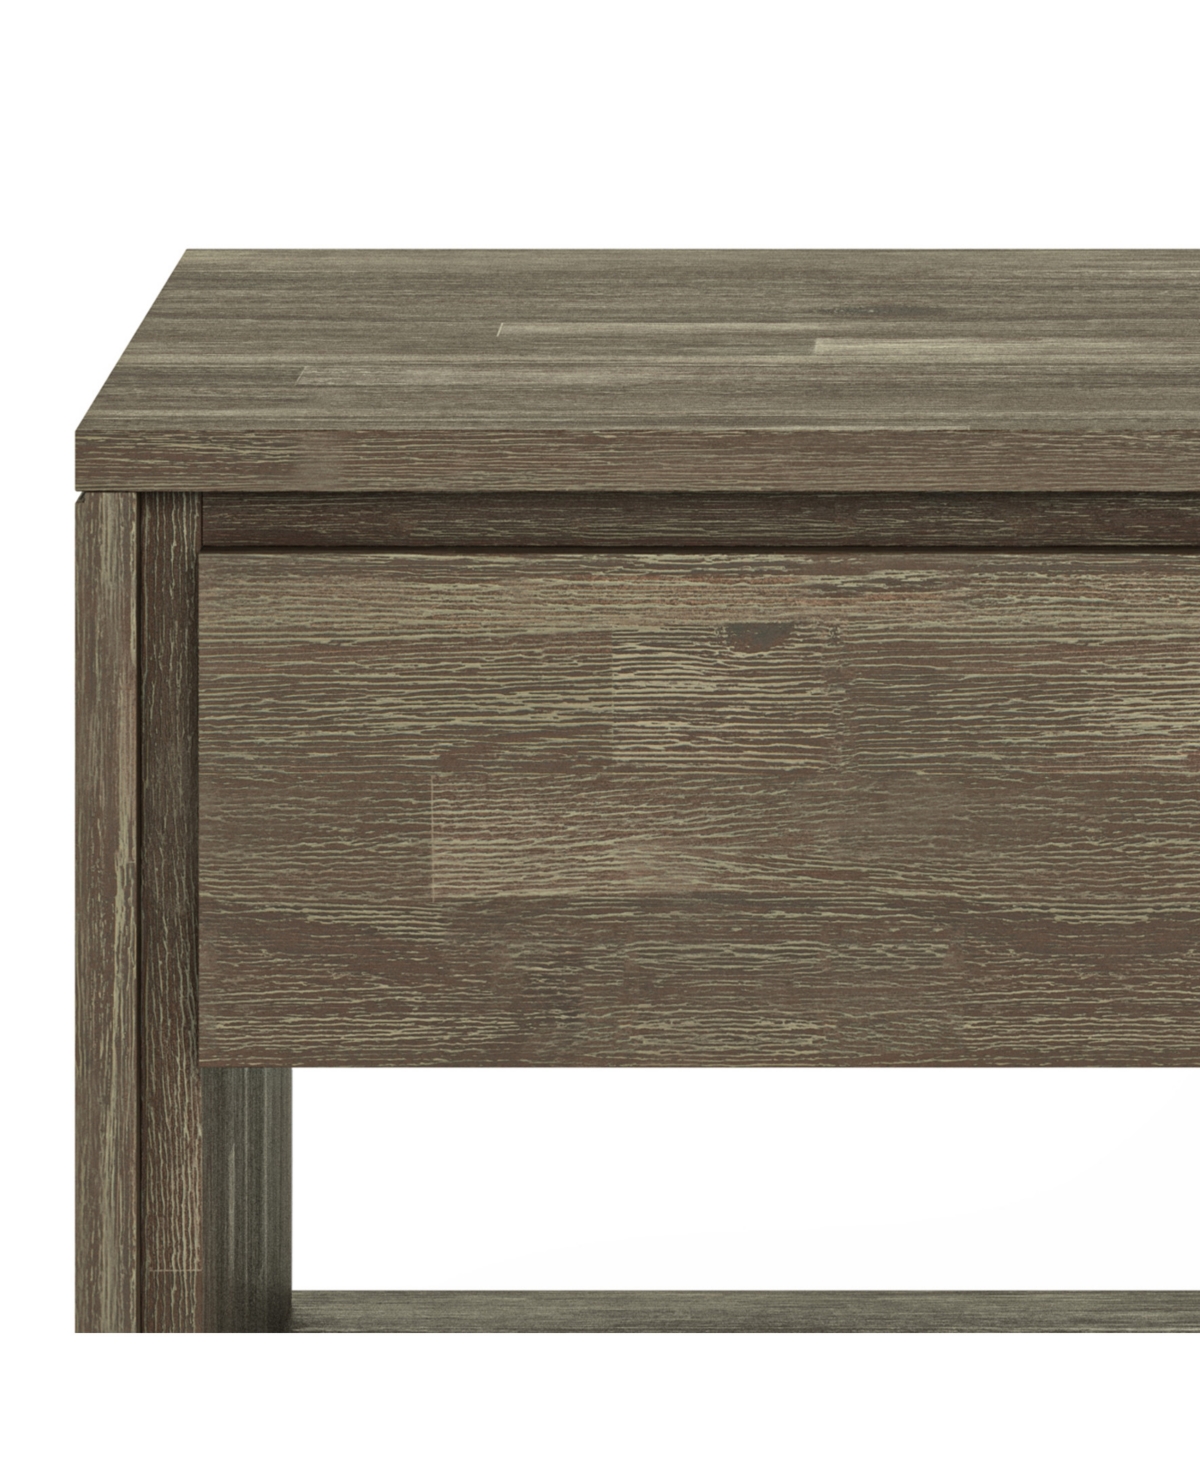 Shop Simpli Home Lowry Solid Acacia Wood End Table In Distressed Grey